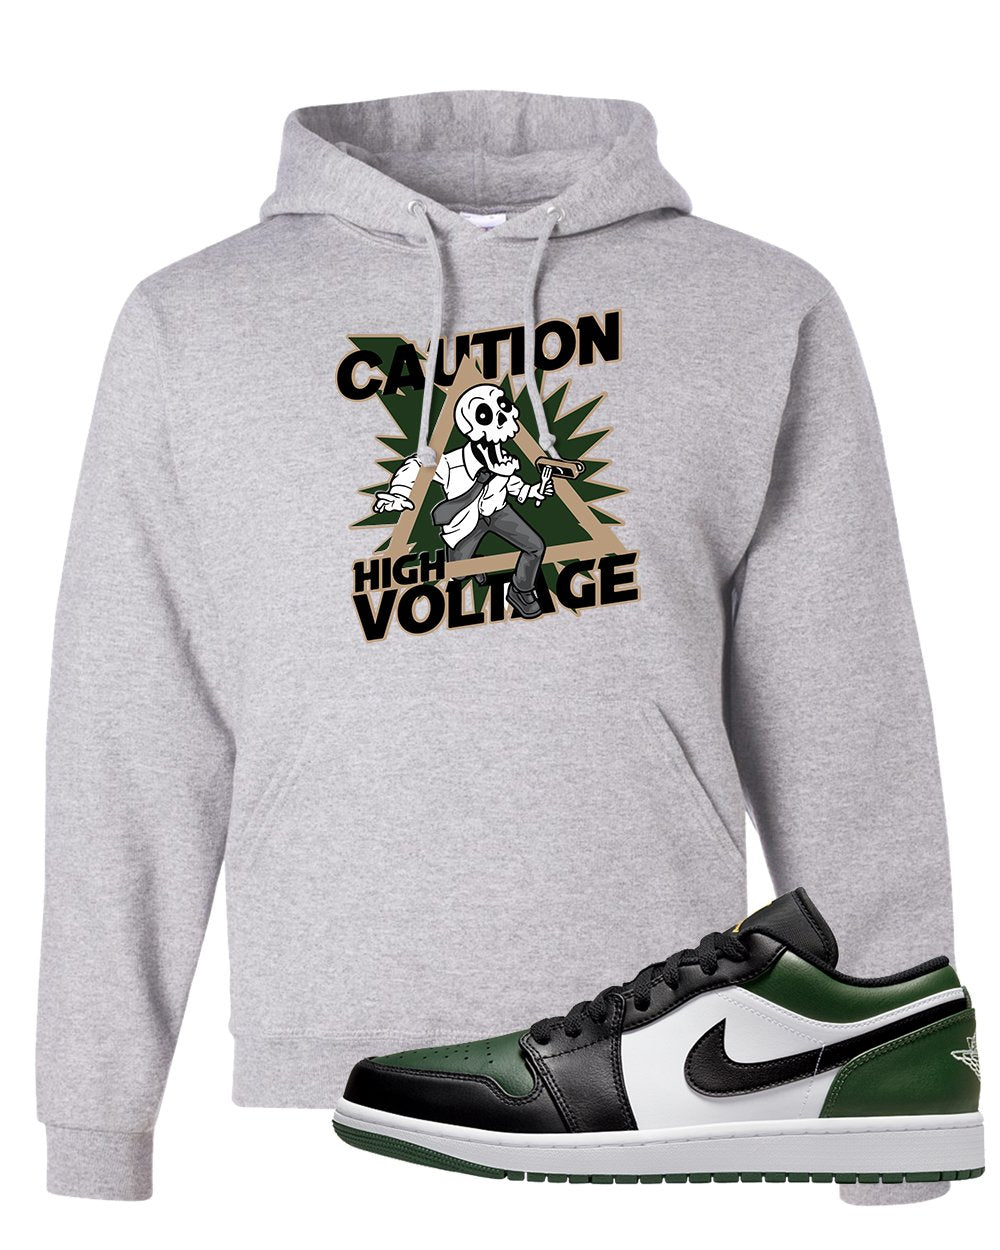 Green Toe Low 1s Hoodie | Caution High Voltage, Ash